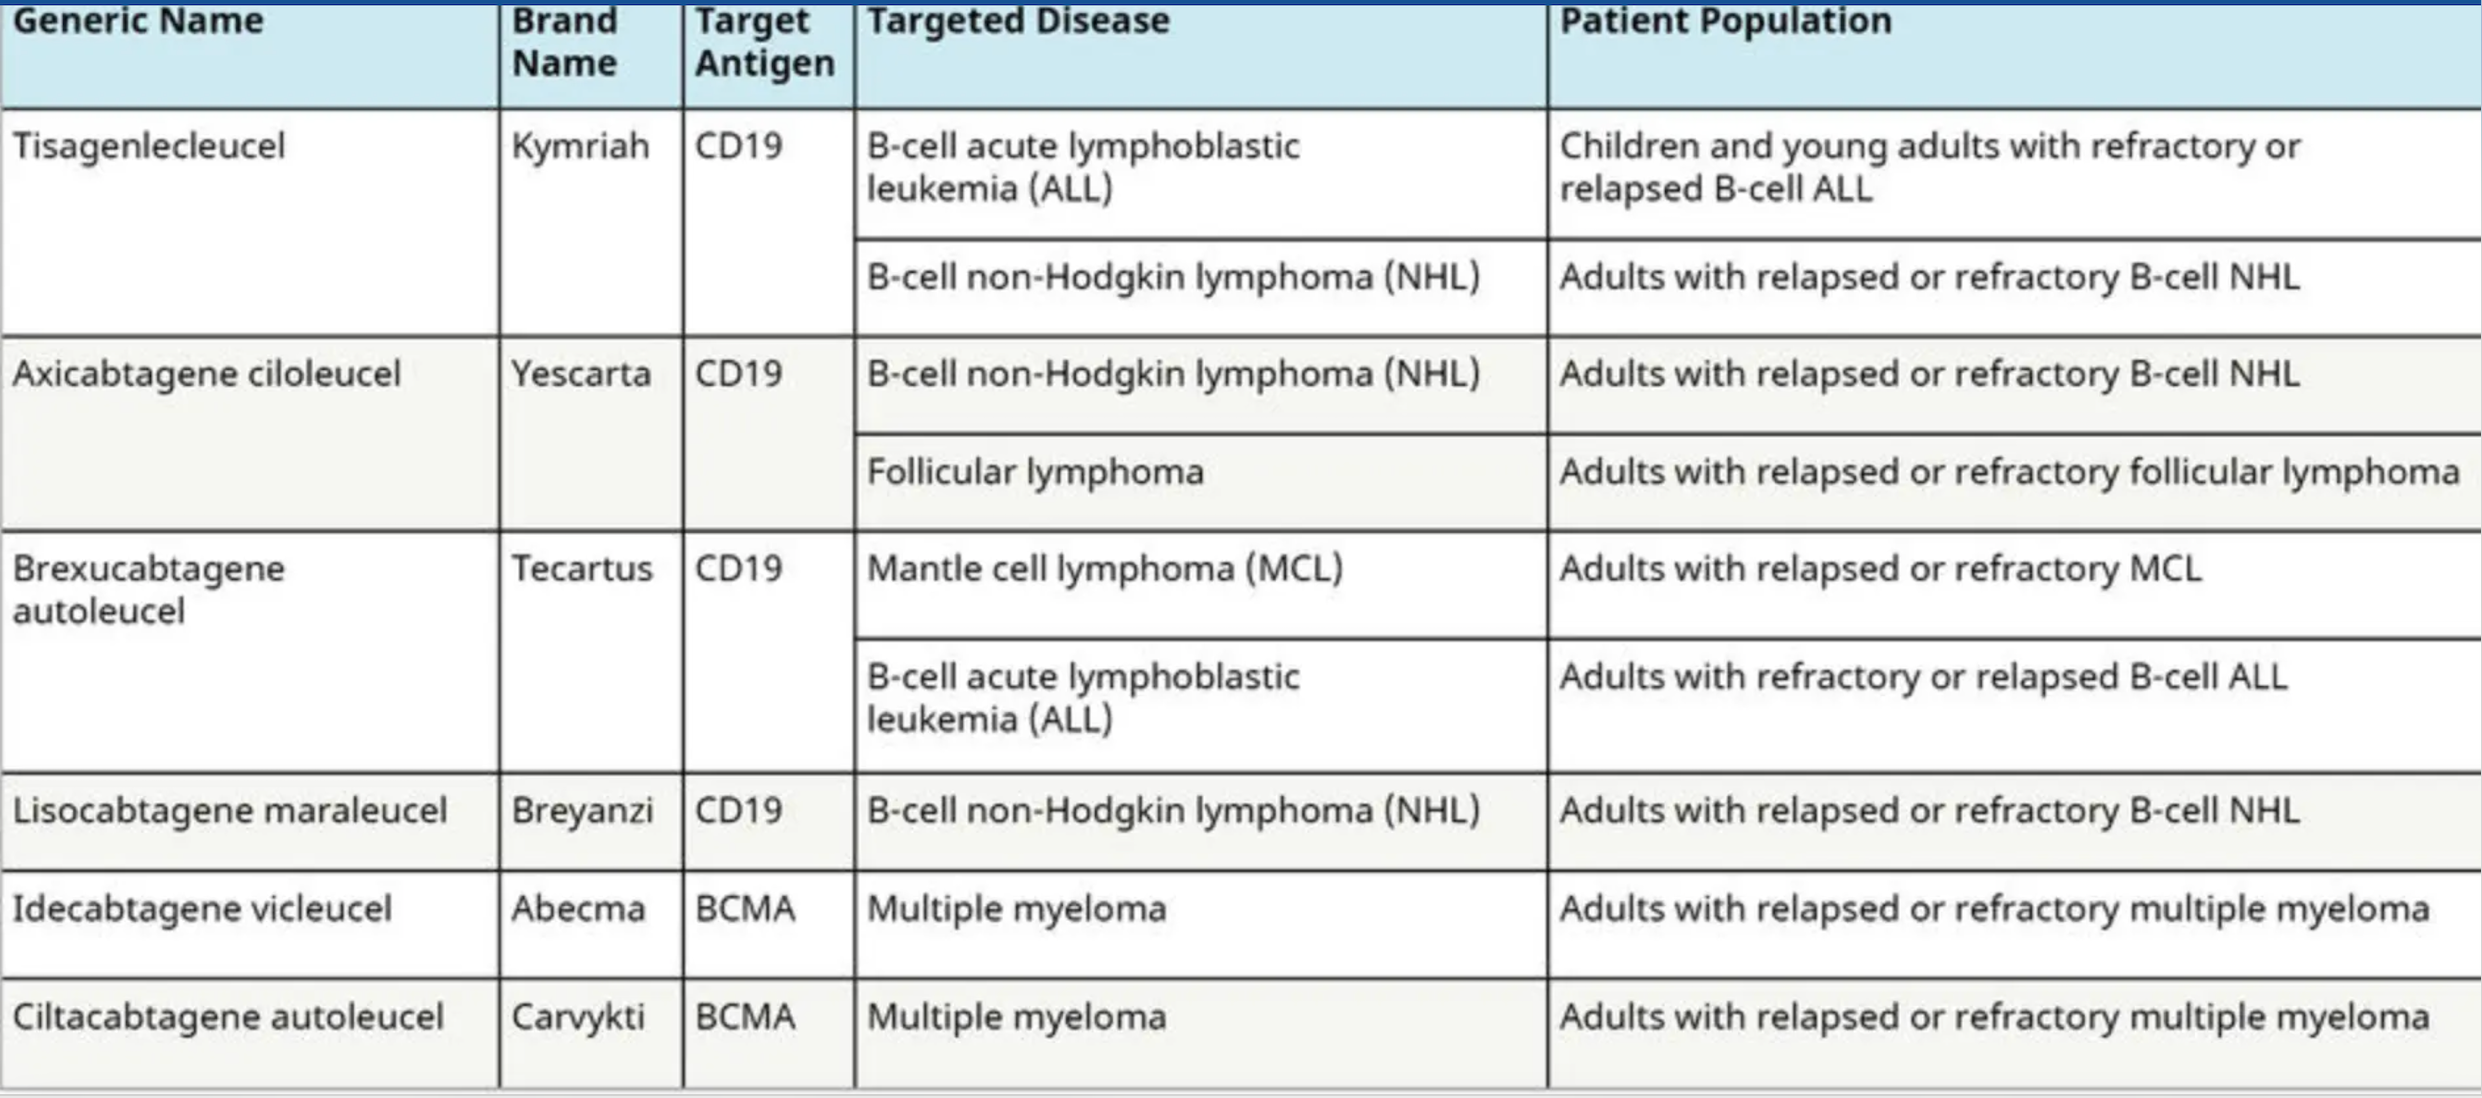 The FDA has approved six CAR T-cell therapies since 2017 for the treatment of hematologic cancers. Credit: National Cancer Institute